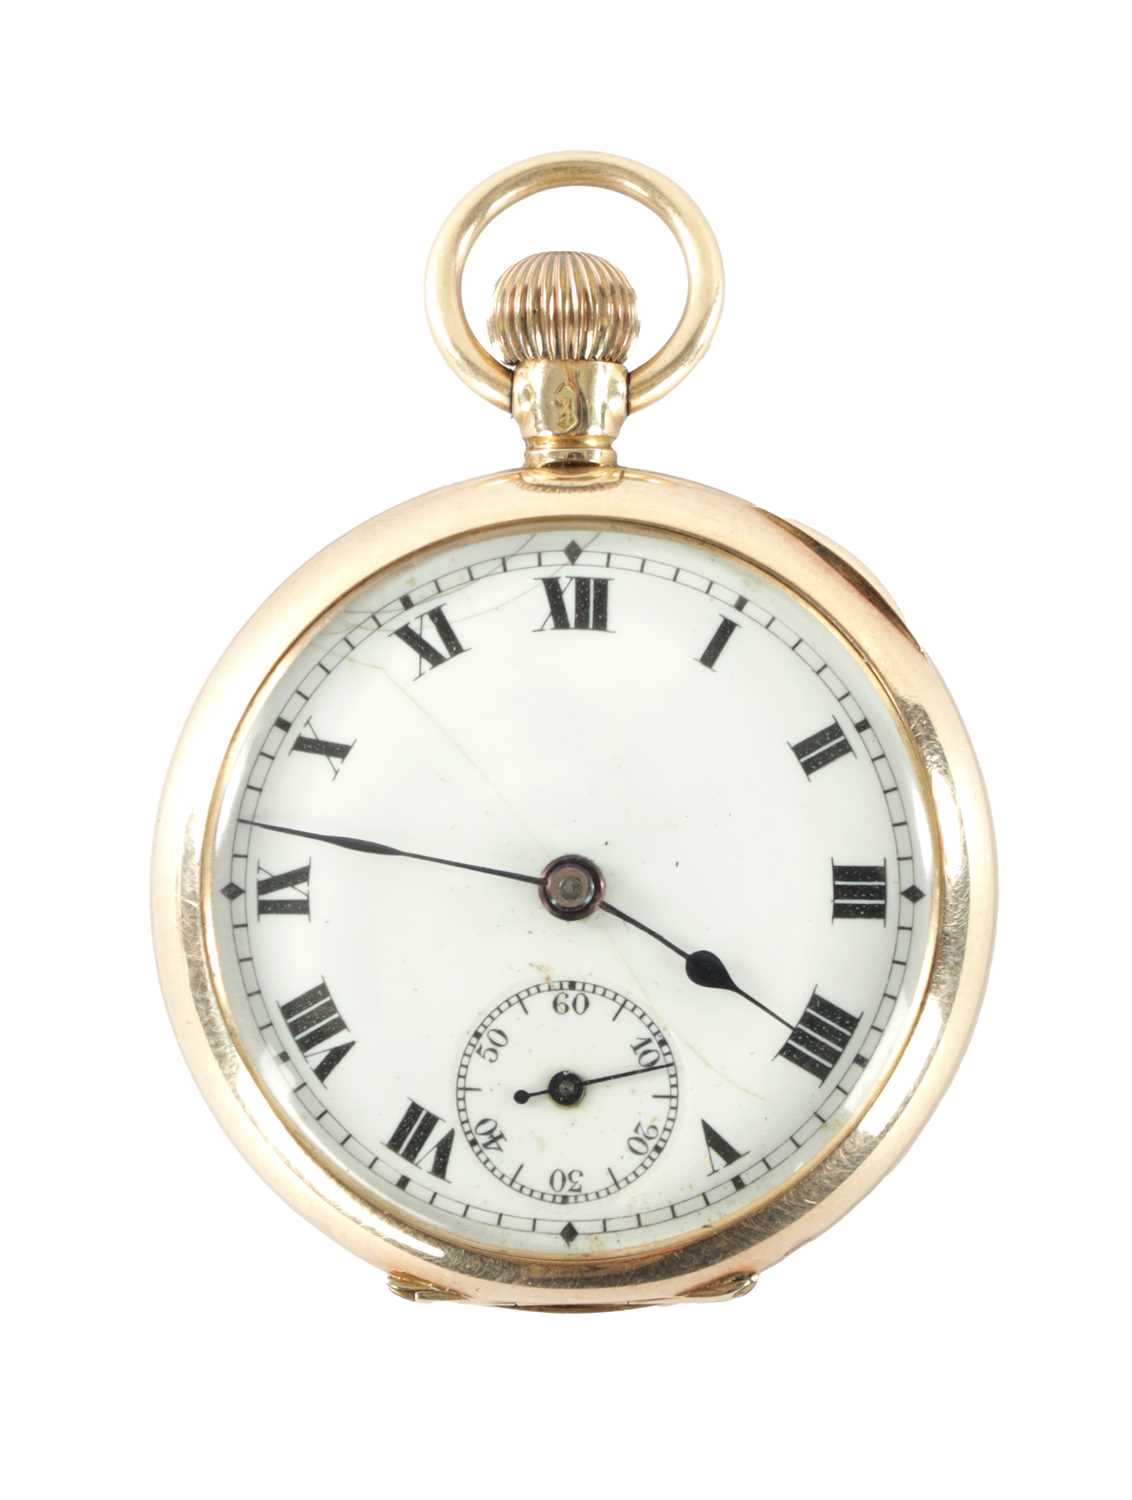 Lot 233 - AN EARLY 20TH CENTURY 12CT GOLD OPEN FACE POCKET WATCH NO 18459